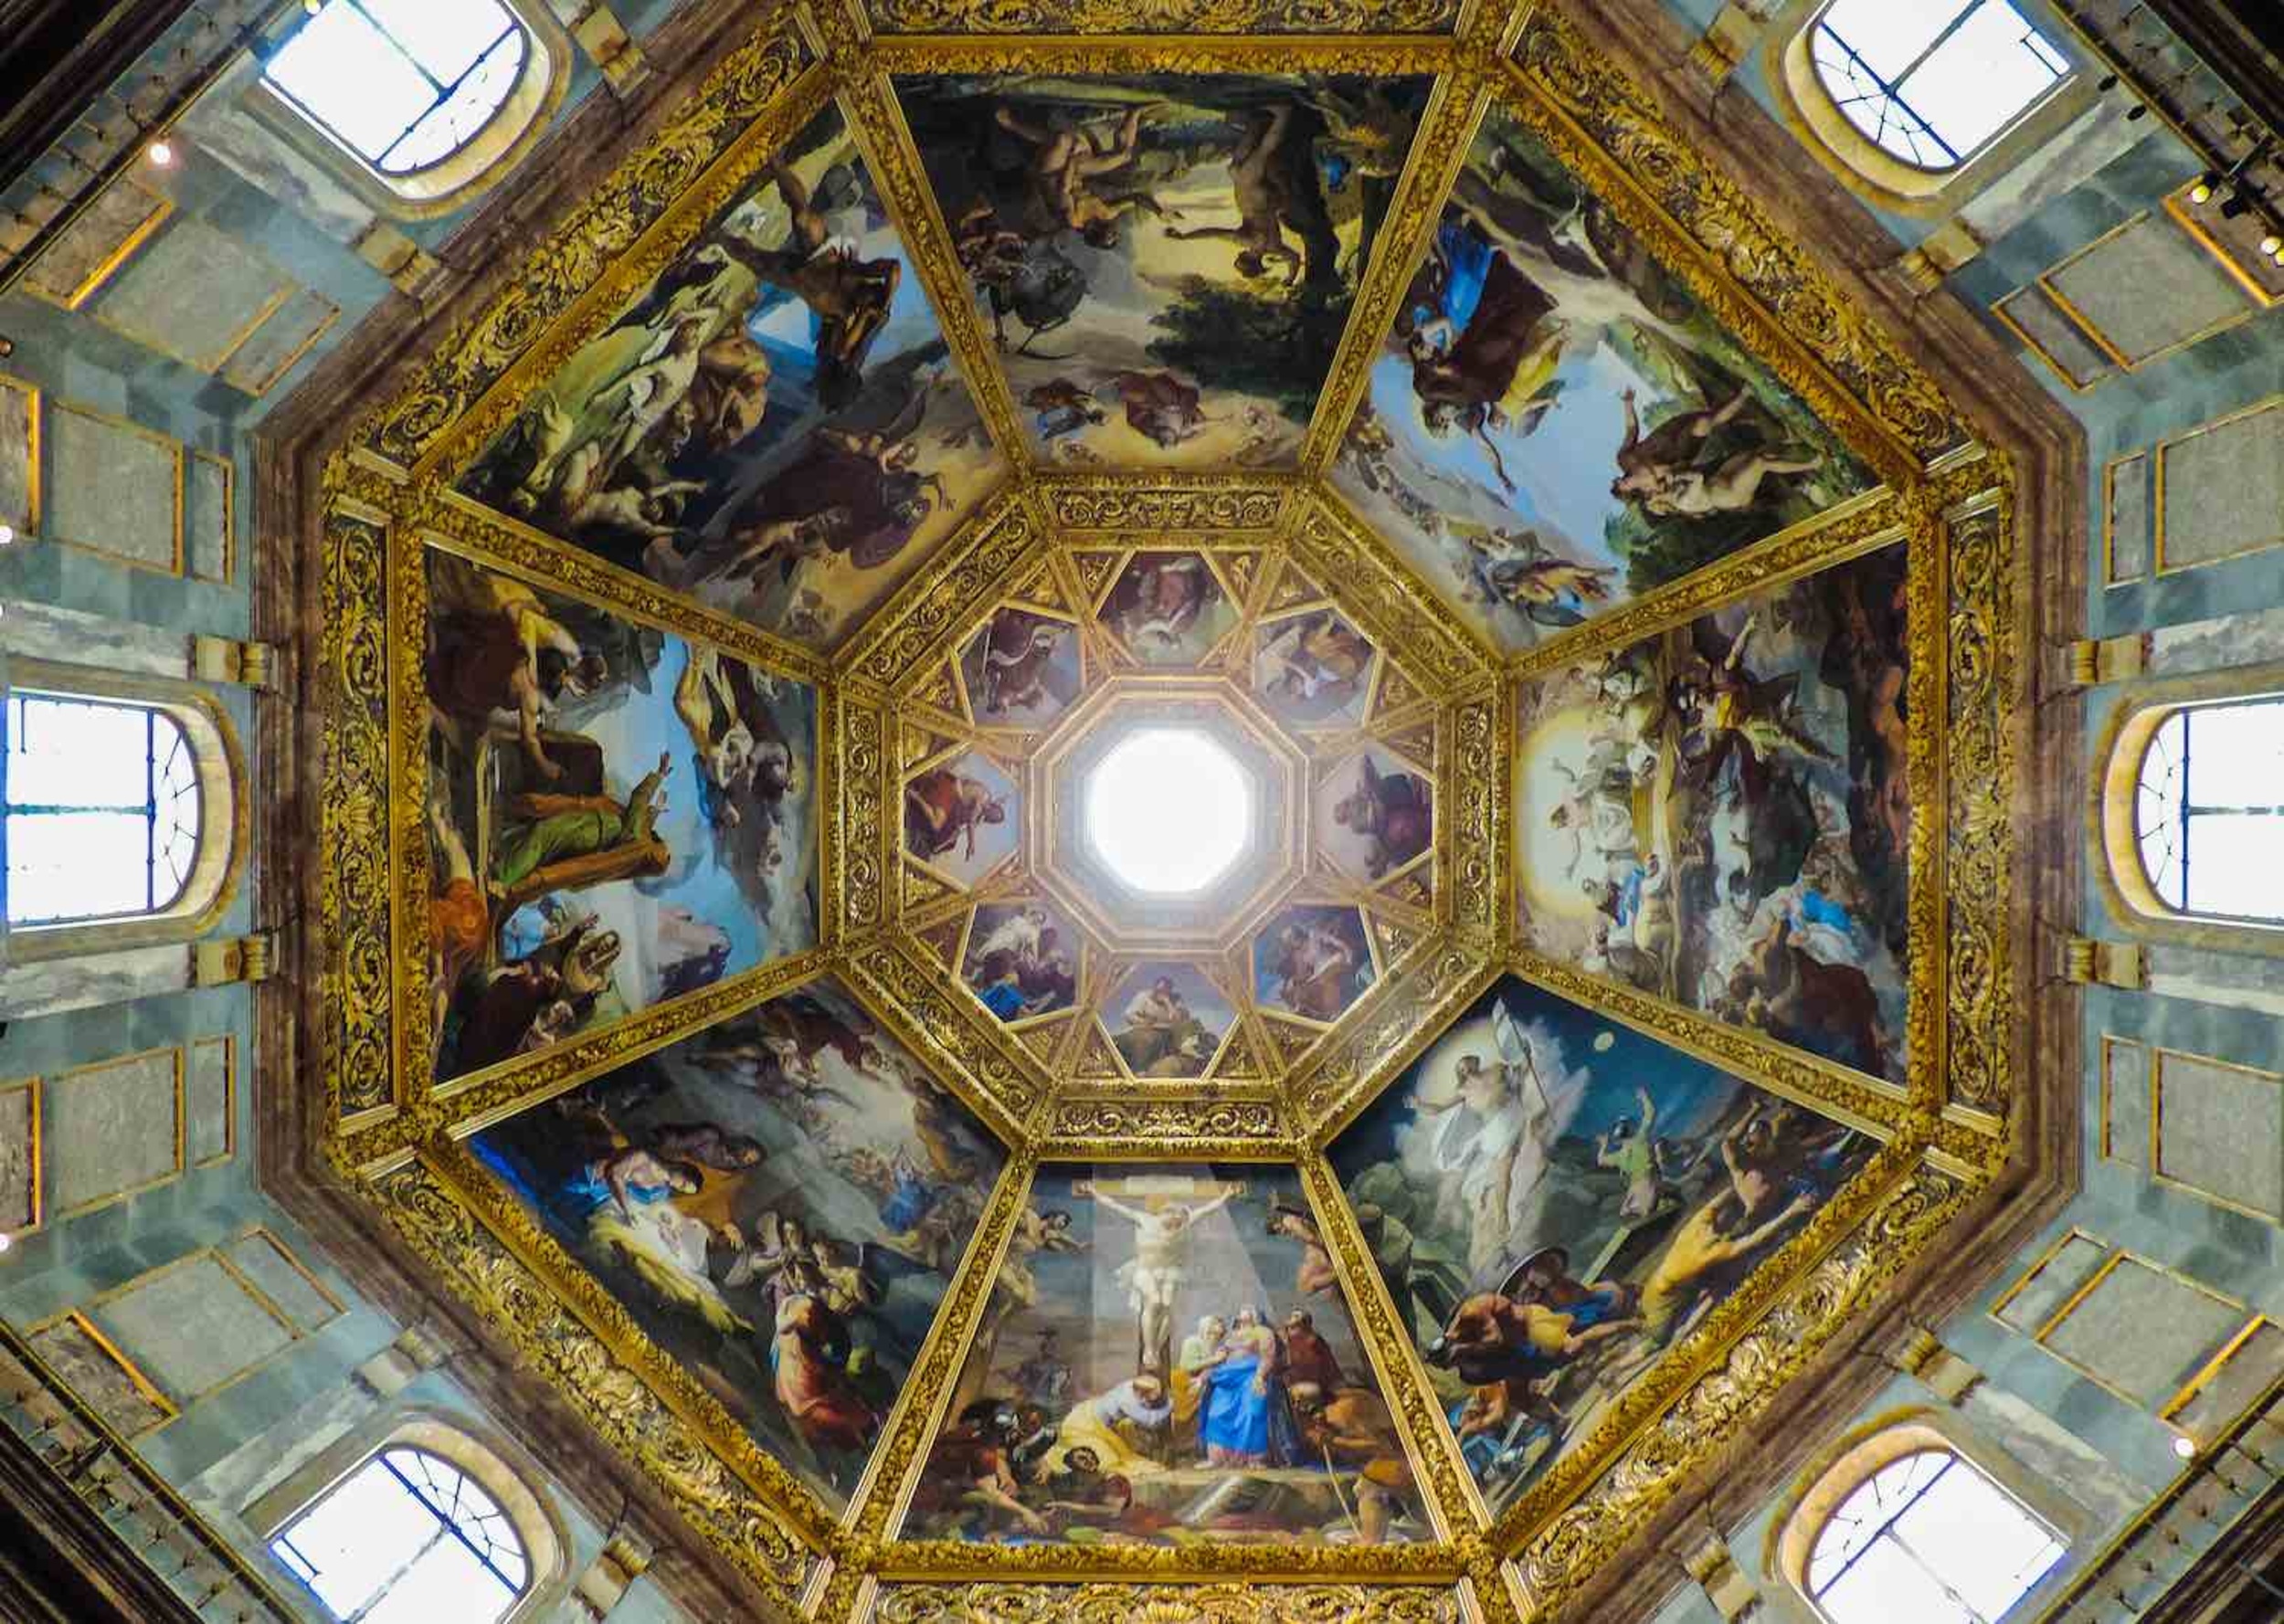 <p>Cappelle Medicee is one of the oldest and largest domes in Florence and one of the city's best-kept secrets. Originally built as a showcase for Medici's art collection, it was turned into a chapel and now houses a room full of Michelangelo's. Even better? No crowds! </p><p><a href='https://www.msn.com/en-us/community/channel/vid-cj9pqbr0vn9in2b6ddcd8sfgpfq6x6utp44fssrv6mc2gtybw0us'>Follow us on MSN to see more of our exclusive lifestyle content.</a></p>